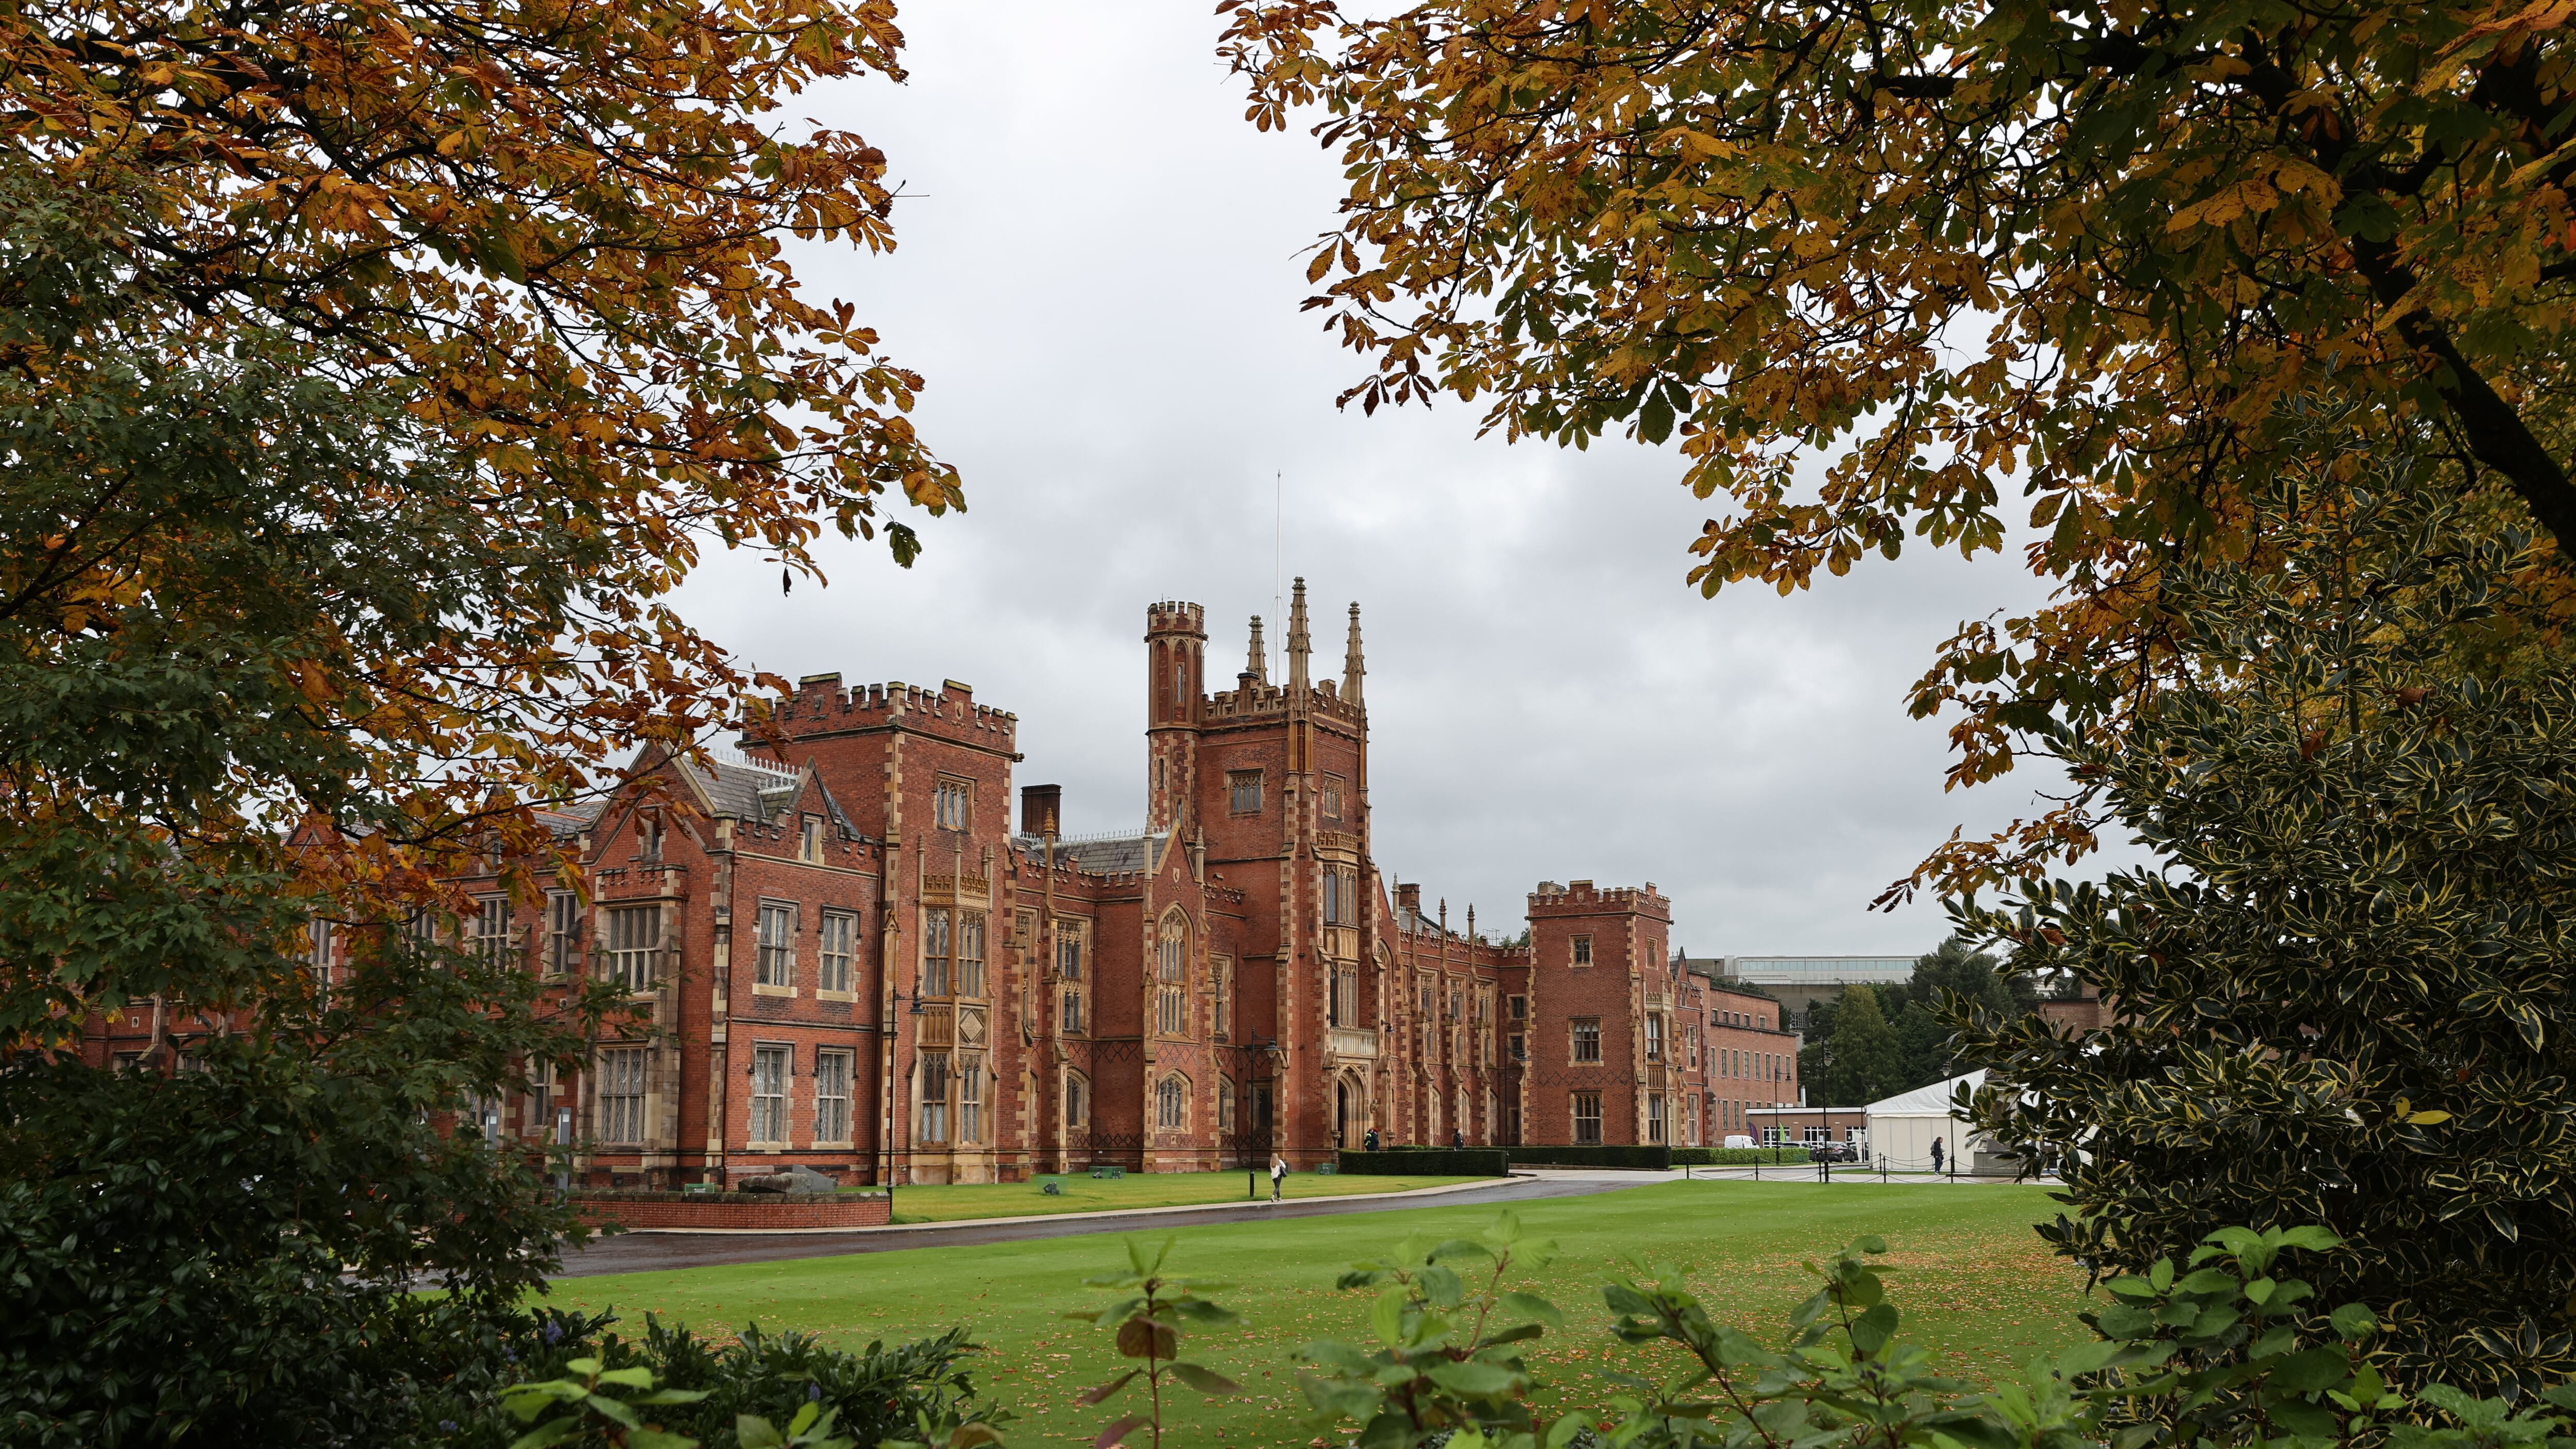 A statement by Queen’s University Belfast on the conflict in the Middle East is ‘not good enough’, a group has contended